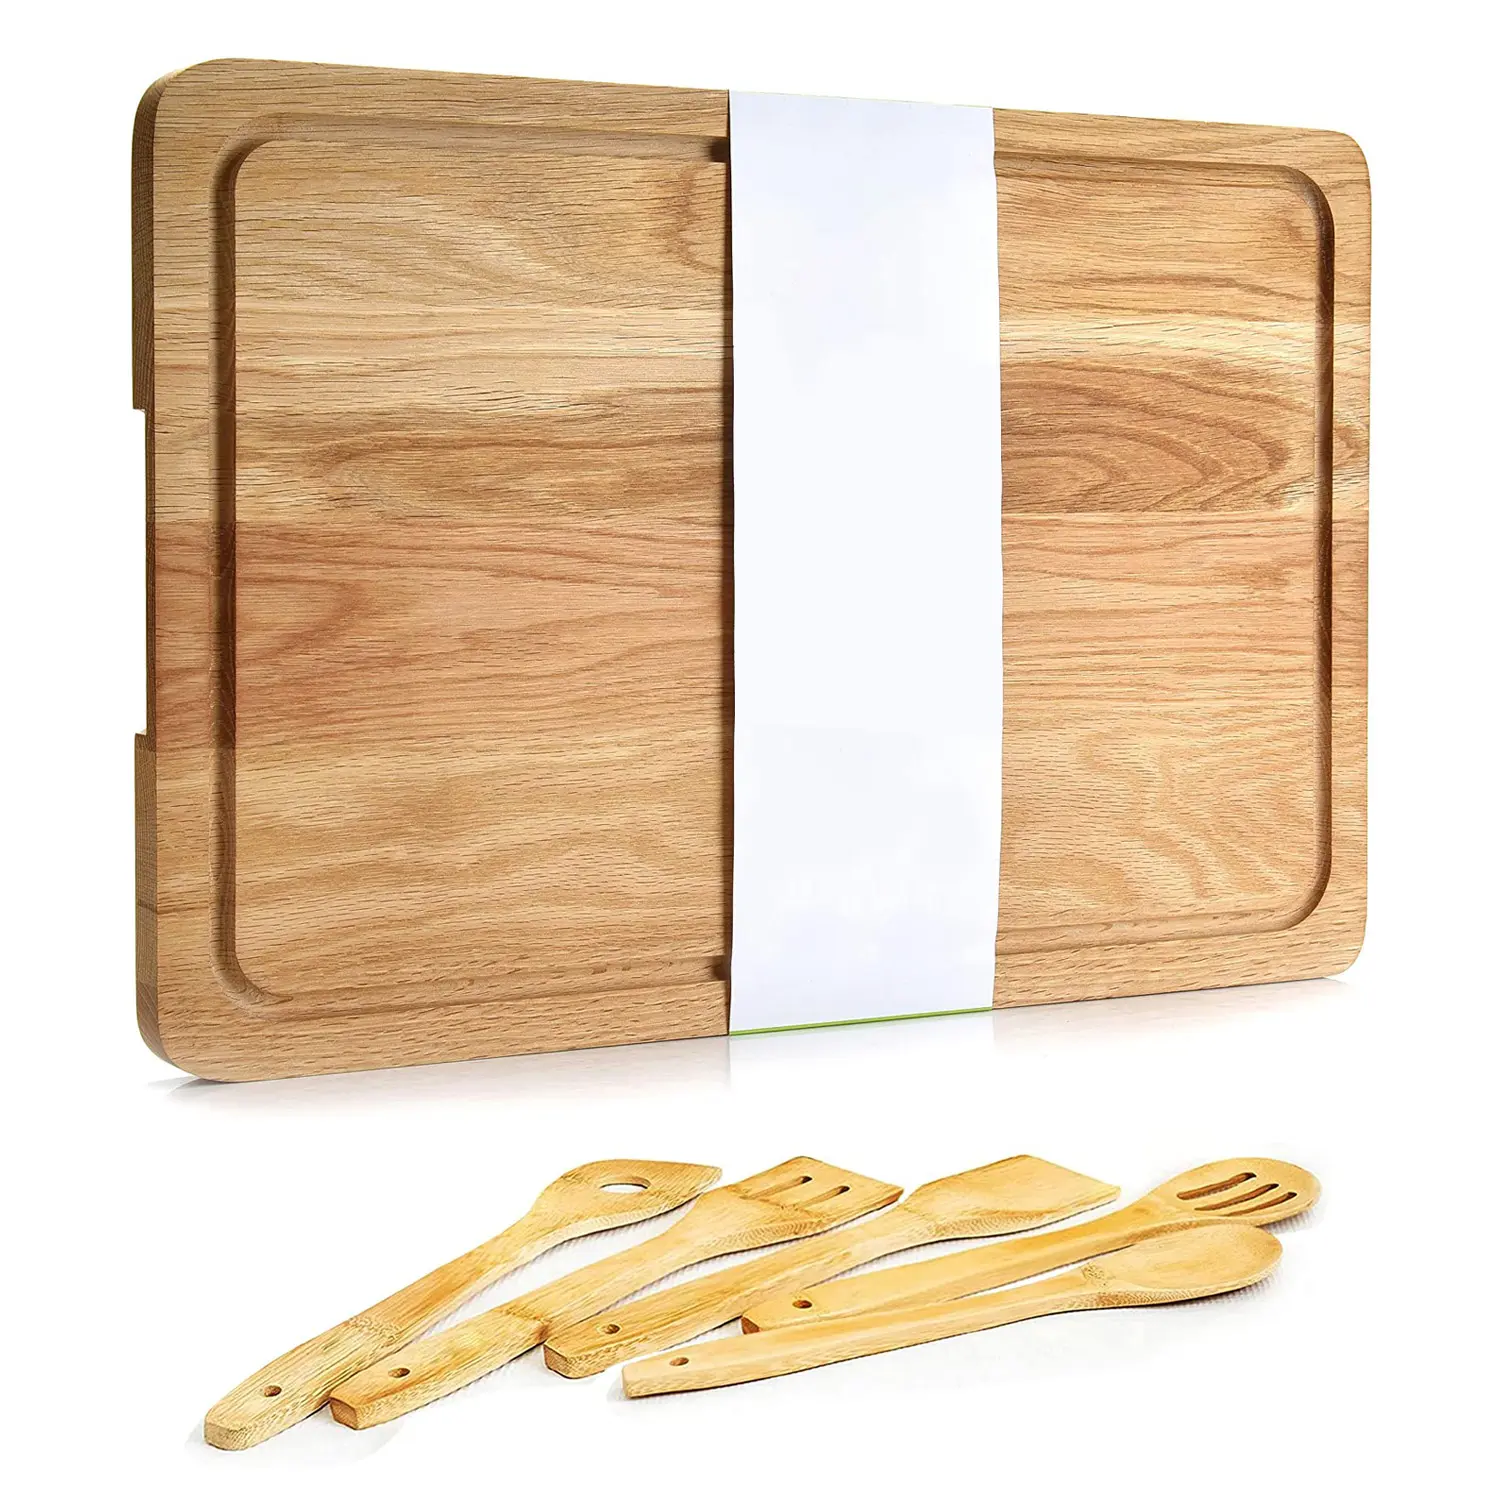 Premium Oak Wooden Chopping Board Solid Kitchen Organic Bamboo Wood Cutting Board with Drip Juice Groove